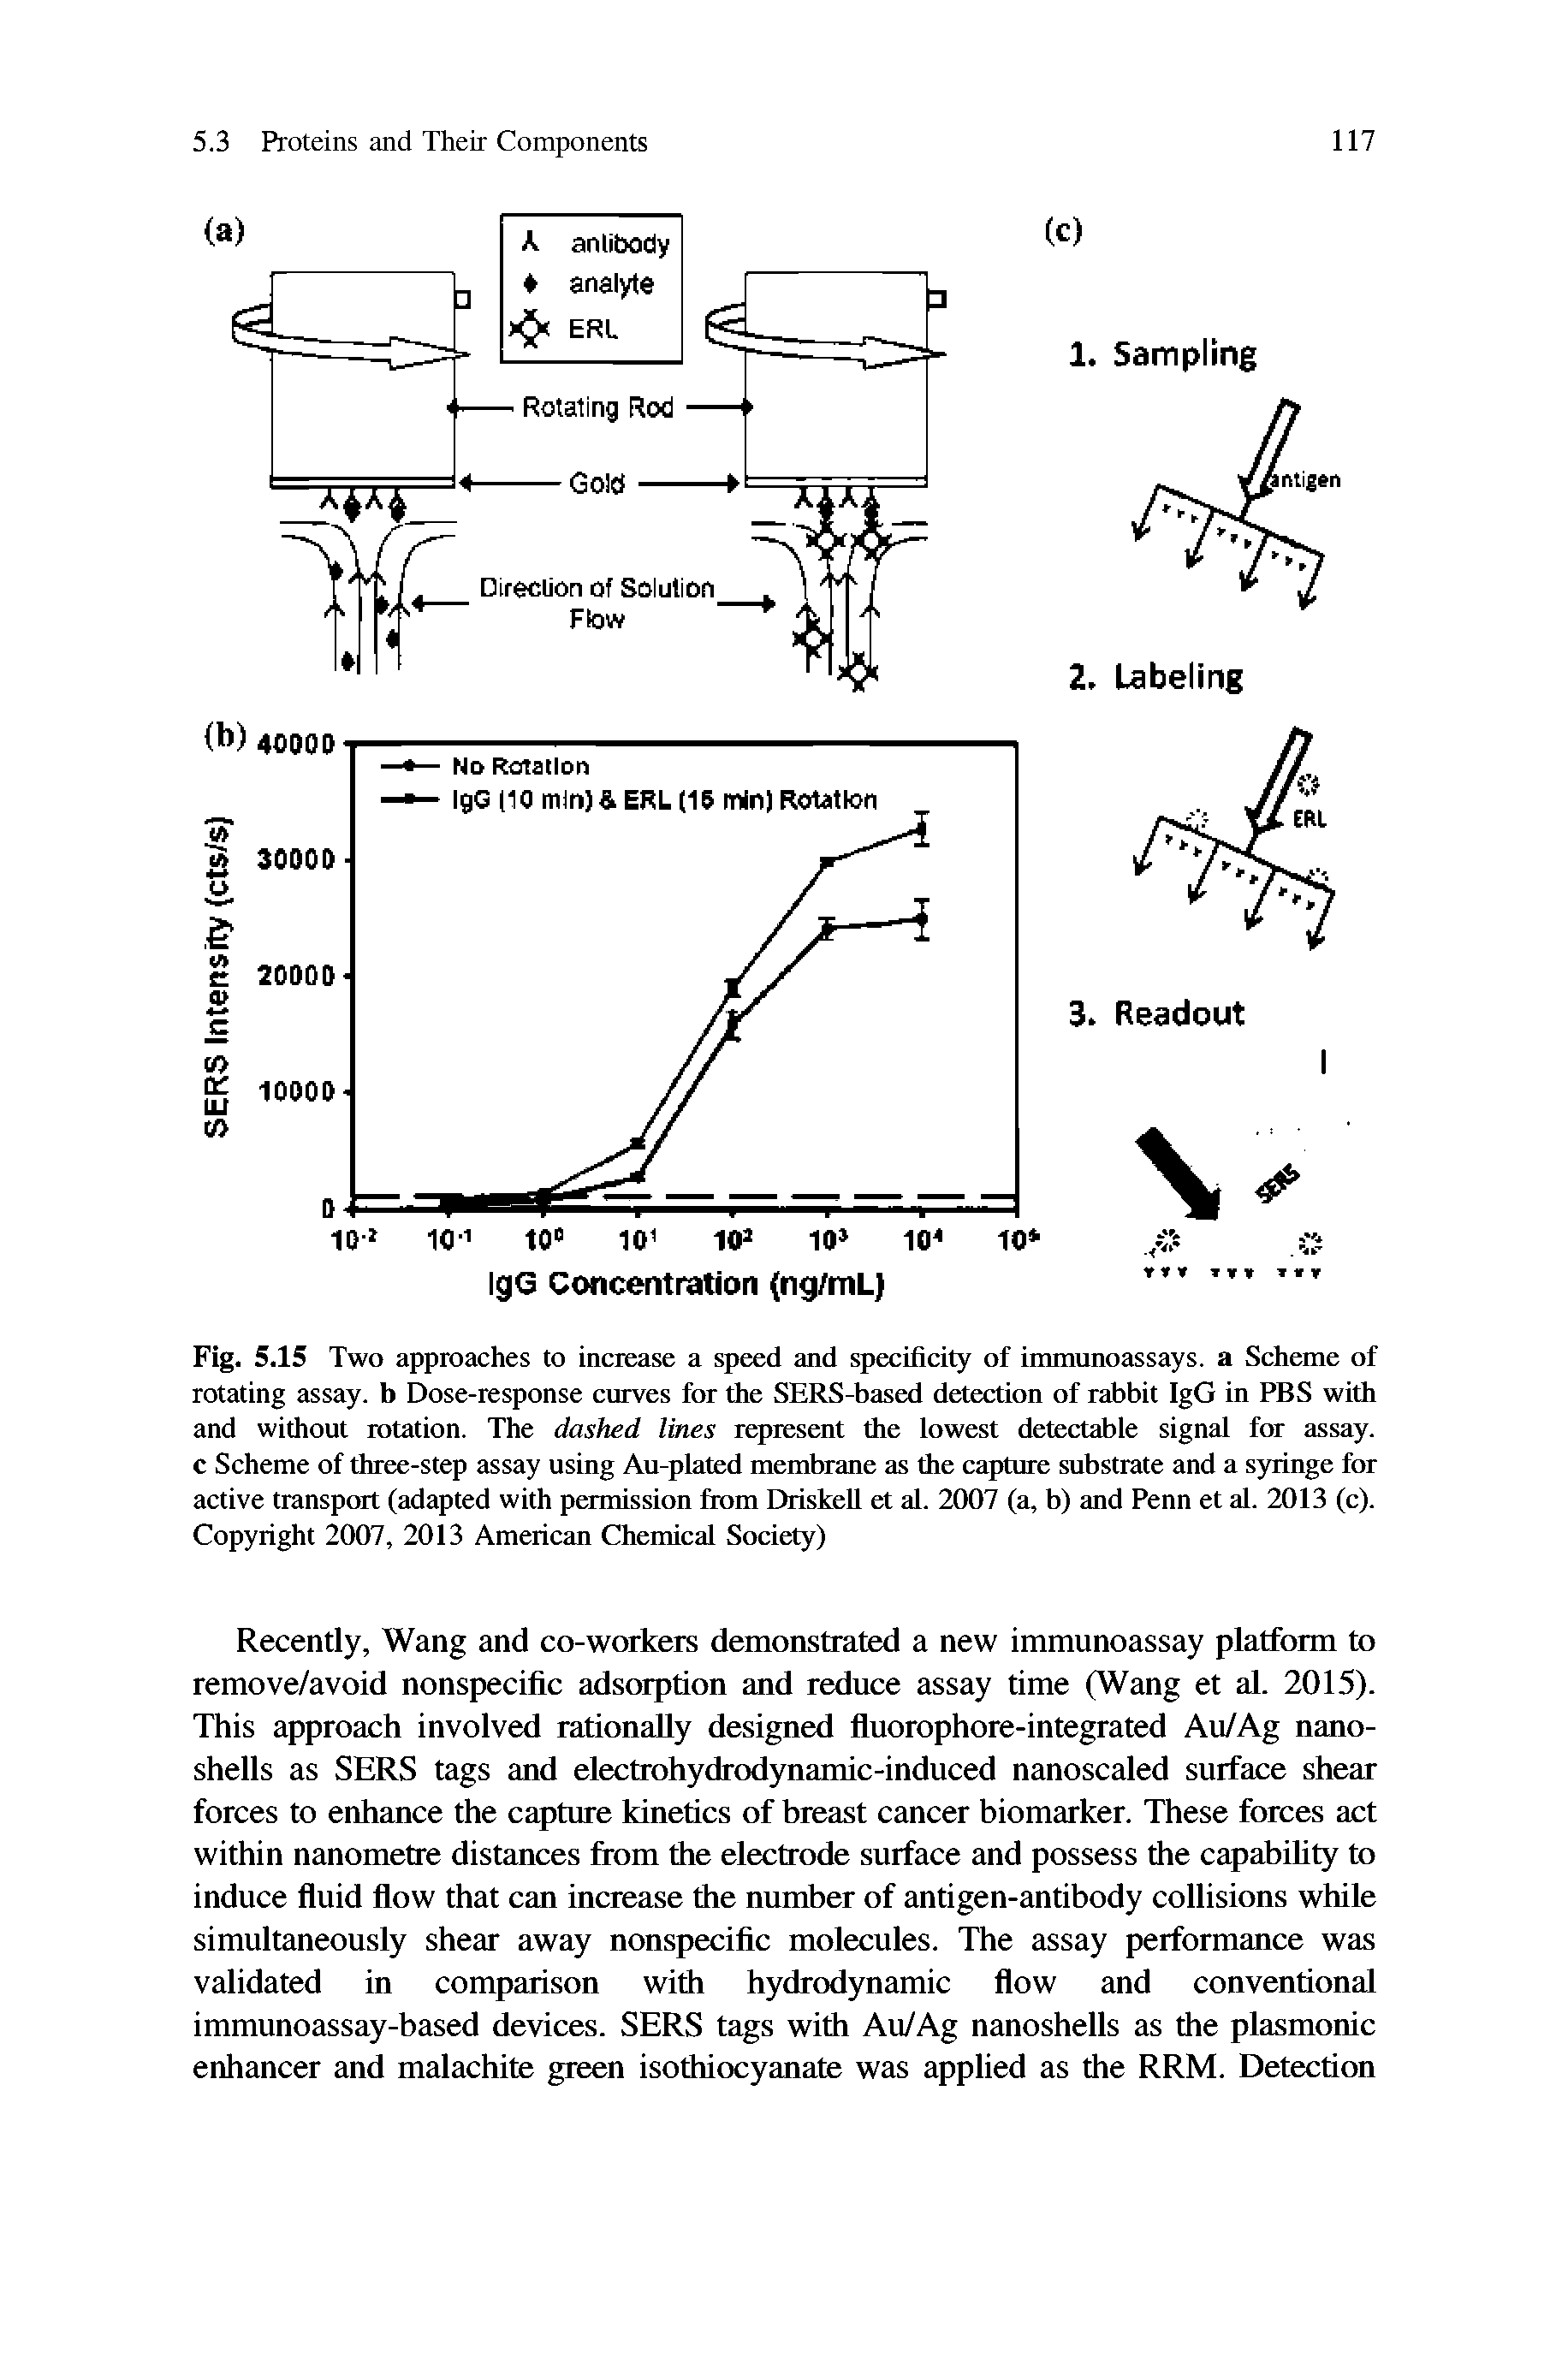 Fig. 5.15 Two approaches to increase a speed and specificity of immunoassays, a Scheme of rotating assay, b Dose-response curves for the SERS-based detection of rabbit IgG in PBS with and without rotation. The dashed lines represent the iowest detectabie signal Iot assay, c Scheme of three-step assay using Au-piated membrane as the capture substrate and a syringe for active transport (adapted with ptamission from Driskeil et ai. 2007 (a, b) and Penn et al. 2013 (c). Copyright 2007, 2013 American Chemical Society)...